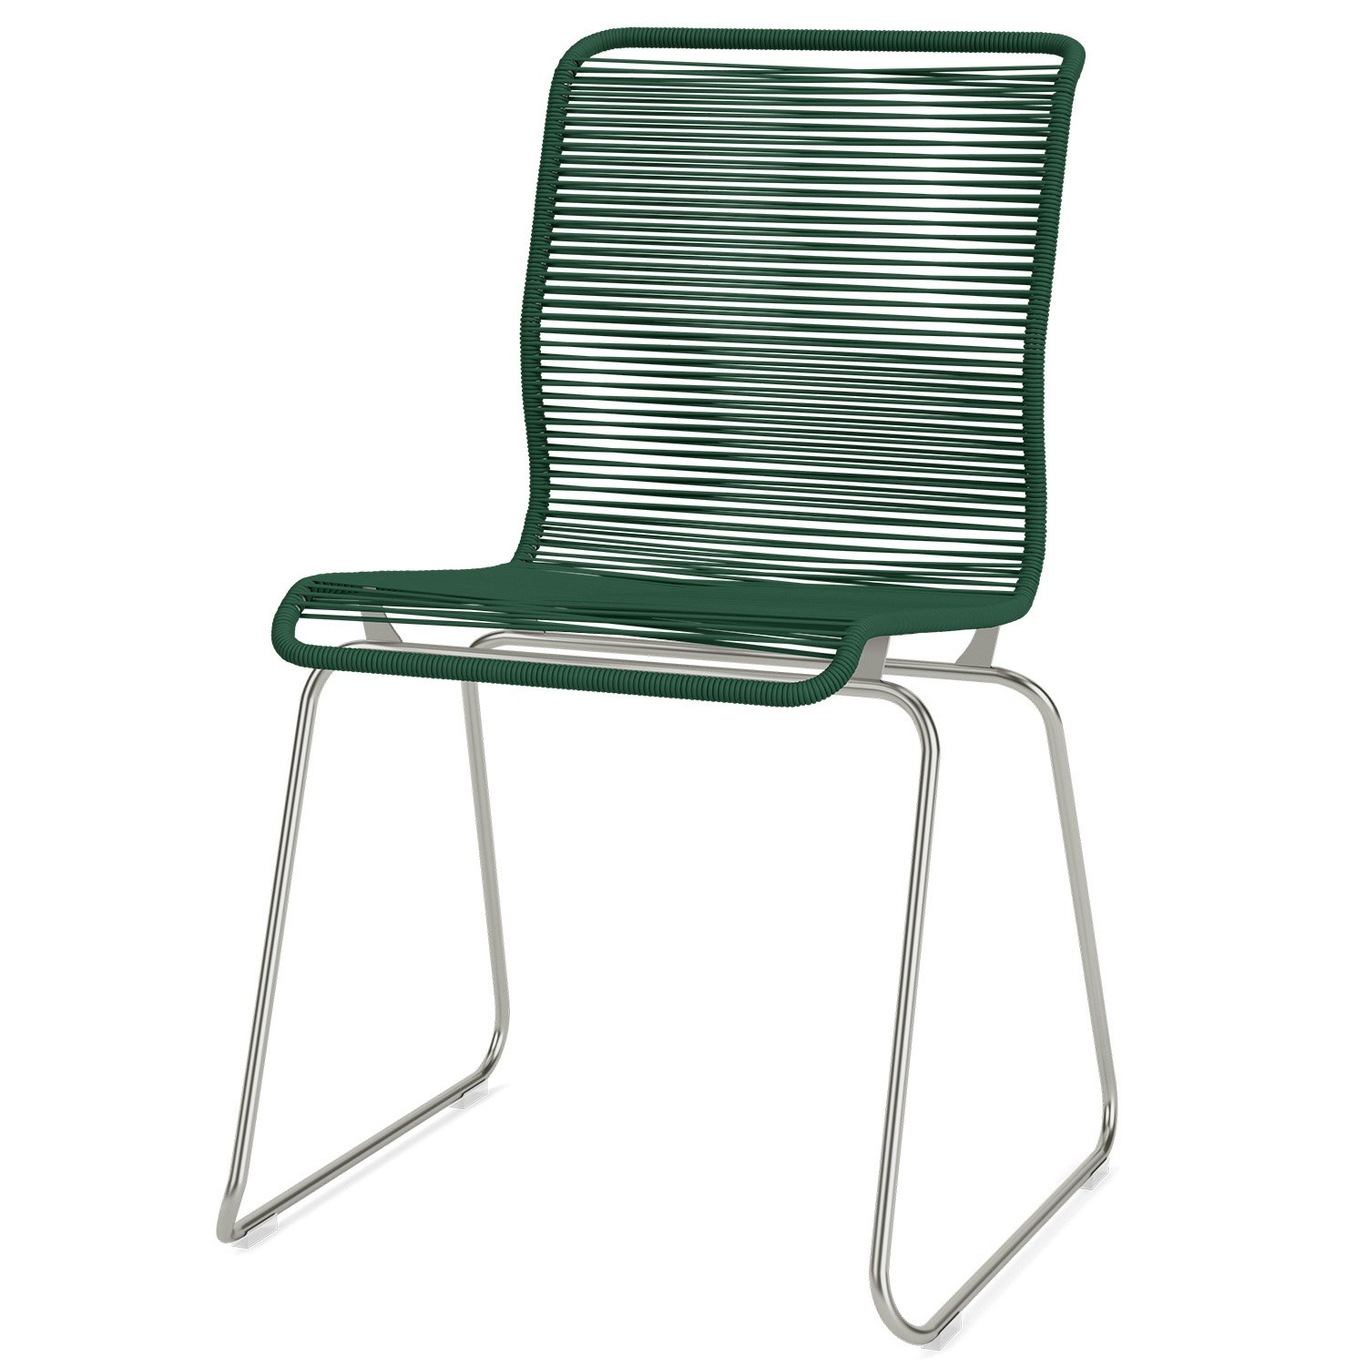 Panton One Dining Chair, Green / Stainless Steel Outdoor